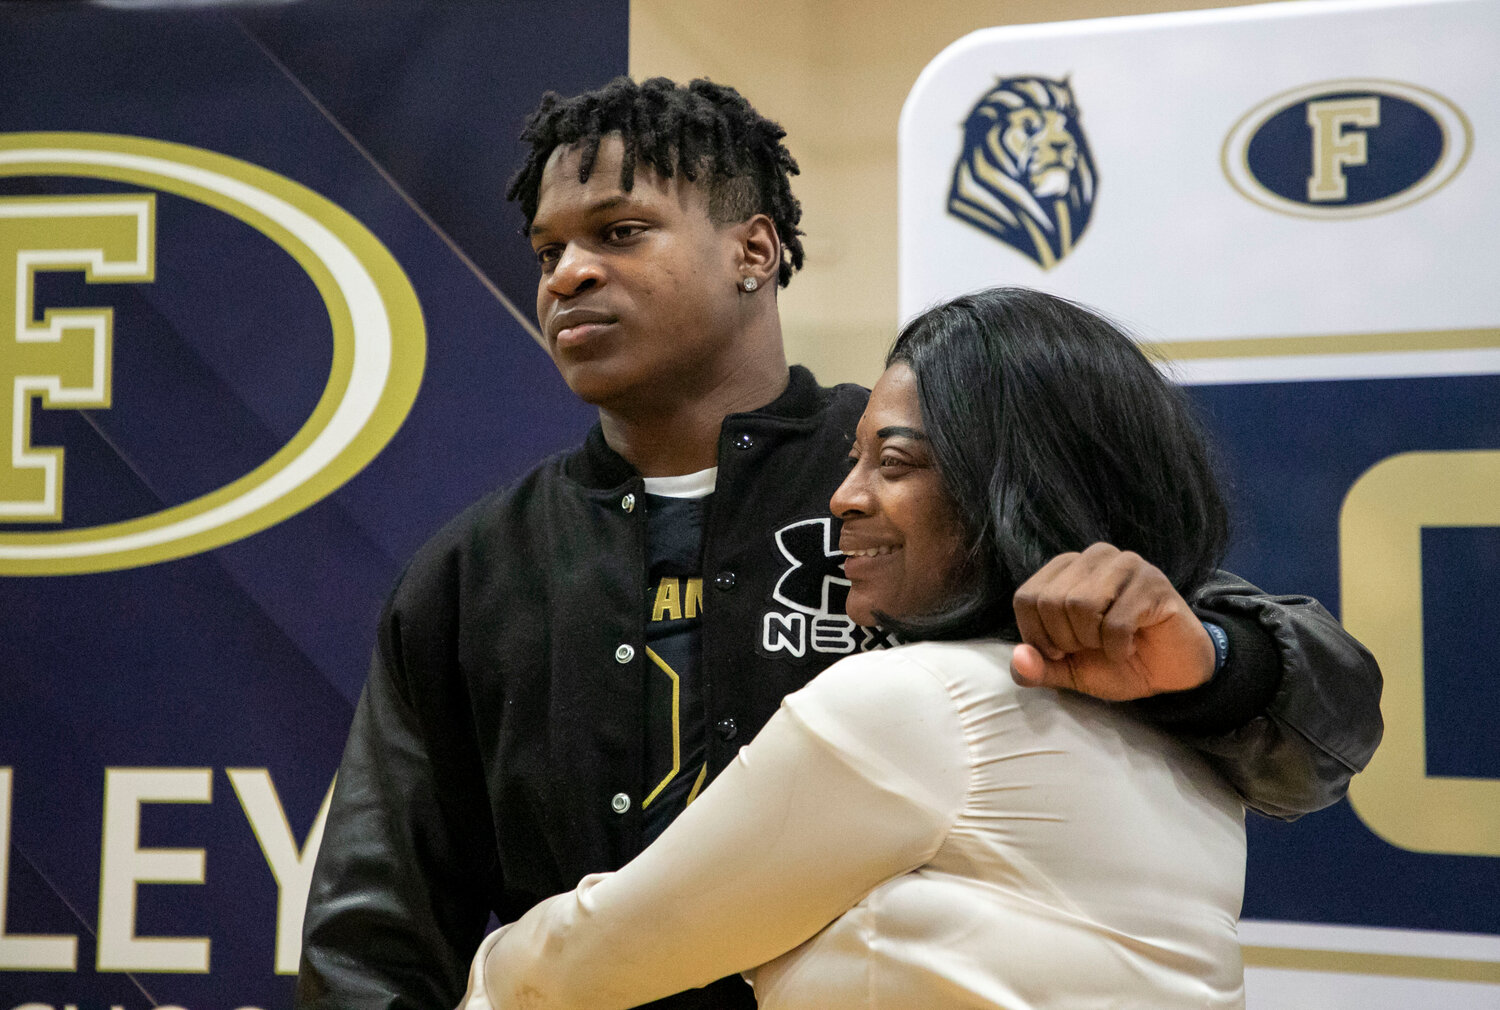 Perry Thompson shares an embrace with his mother Tennille at the ceremony in Foley on Friday, Nov. 17, where the receiver was presented his jersey ahead of the Under Armour All-America Game set for Jan. 3, 2024.